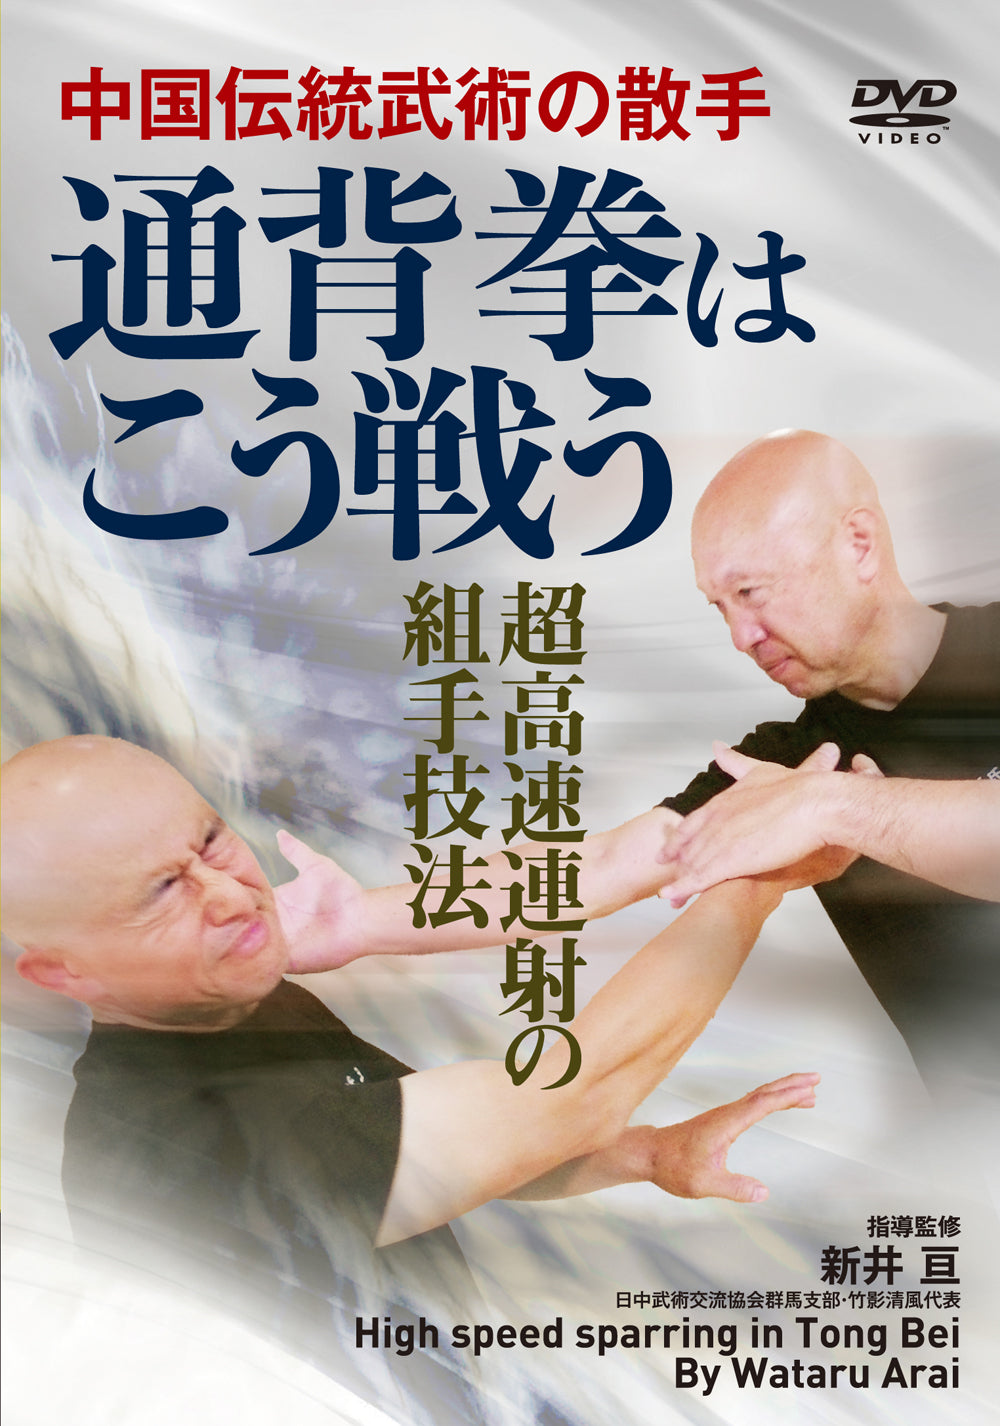 Mastering the Art of Tong Bei: High Speed Sparring DVD by Wataru Arai